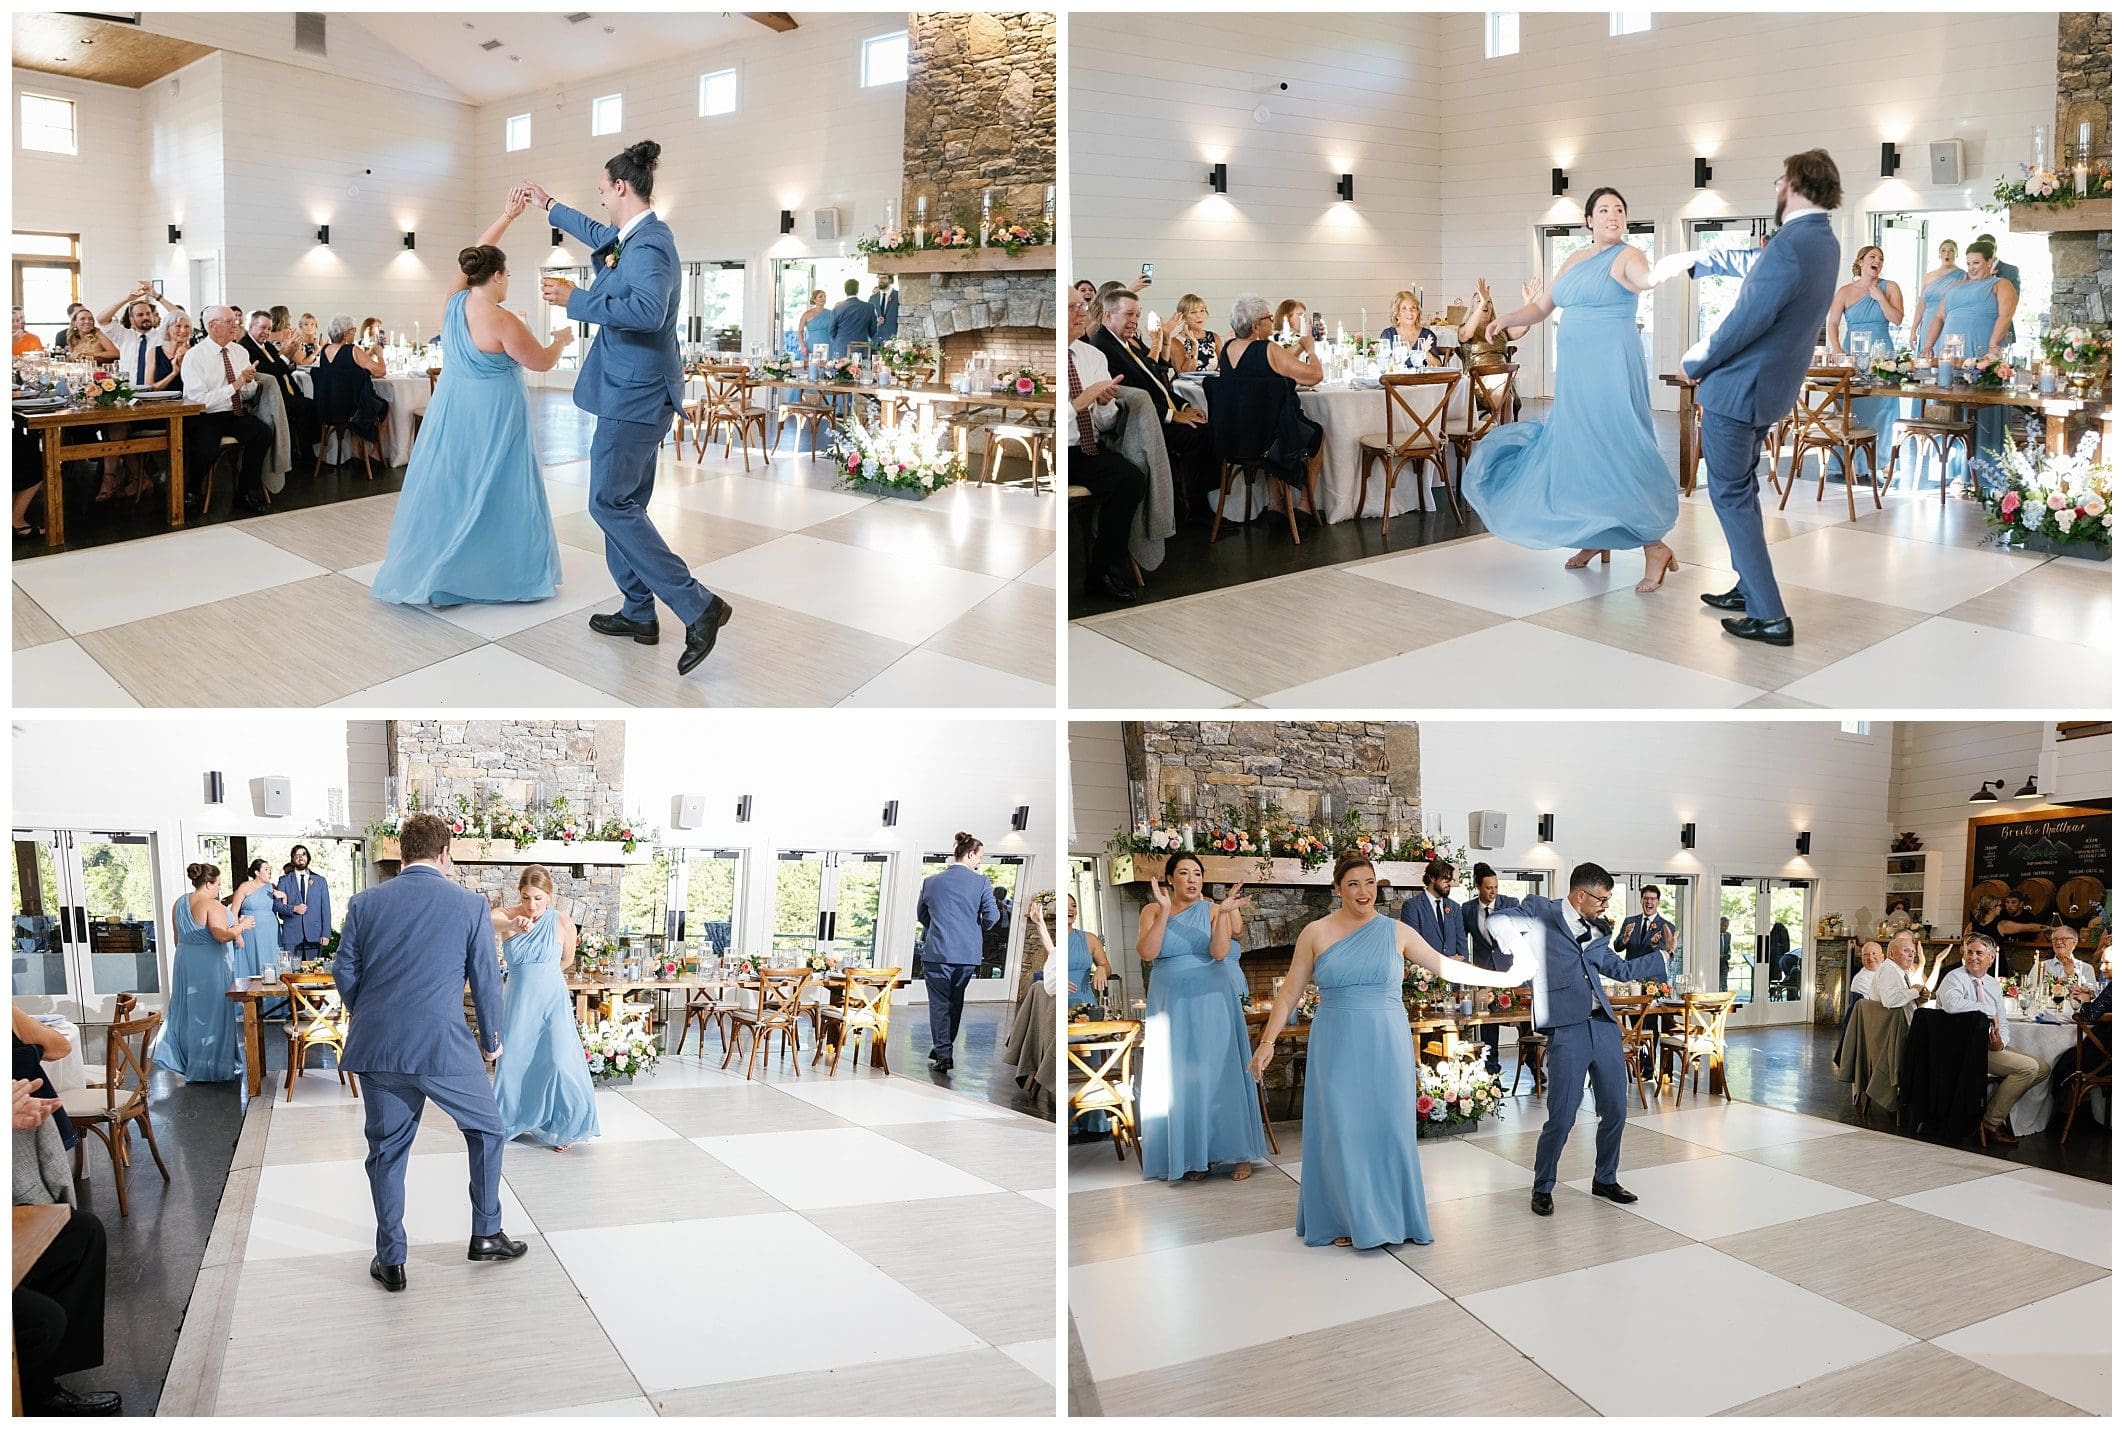 A bride and groom dancing at their wedding reception.